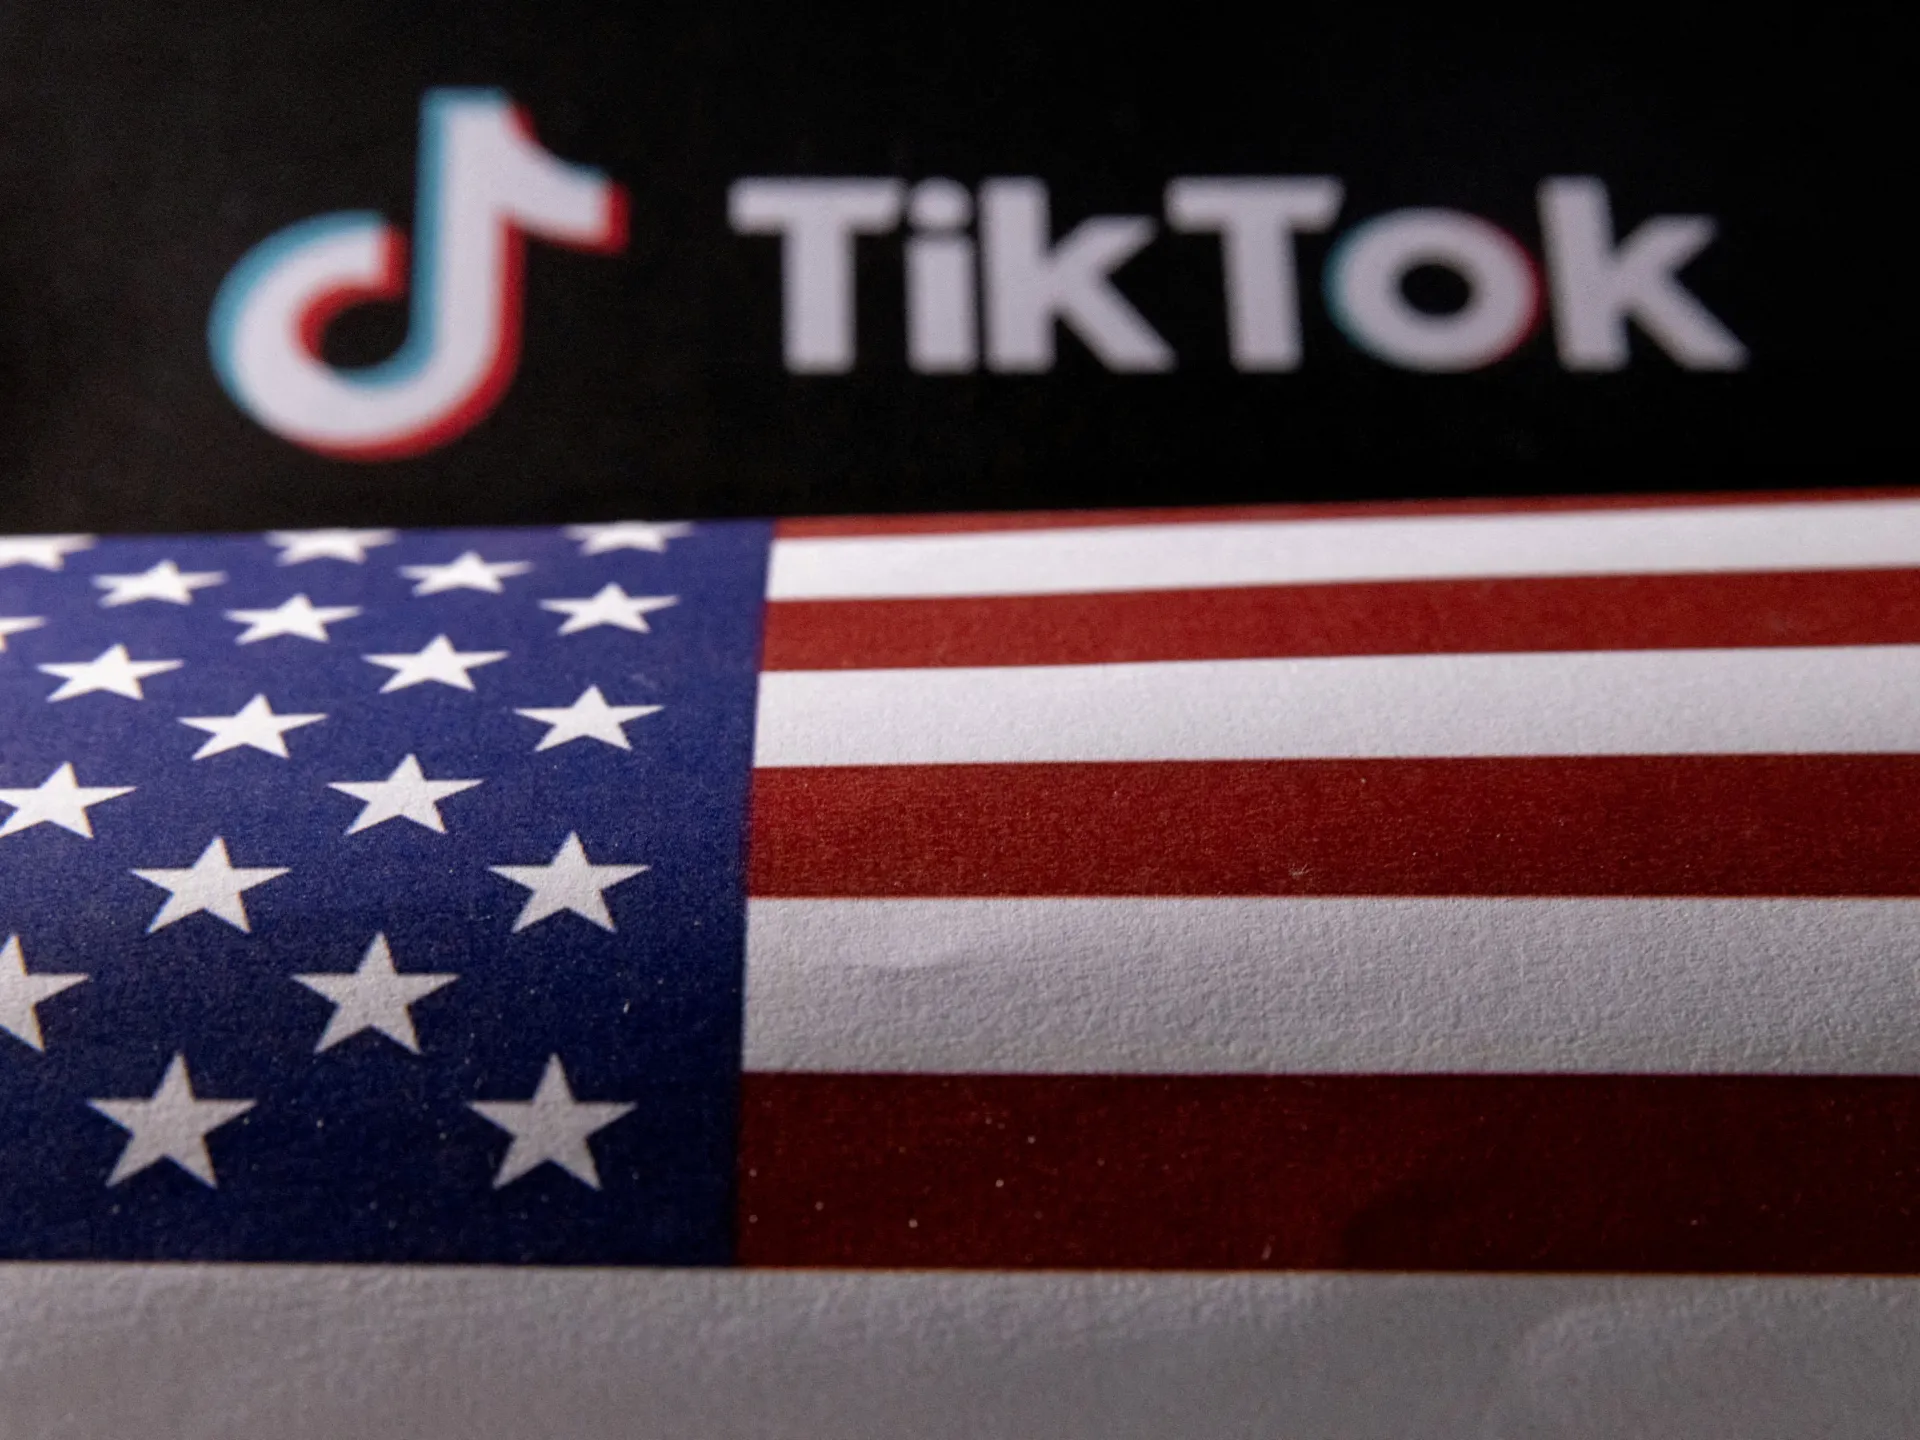 TikTok users plan to join legal action against the divestiture bill (Credits: Al Jazeera)